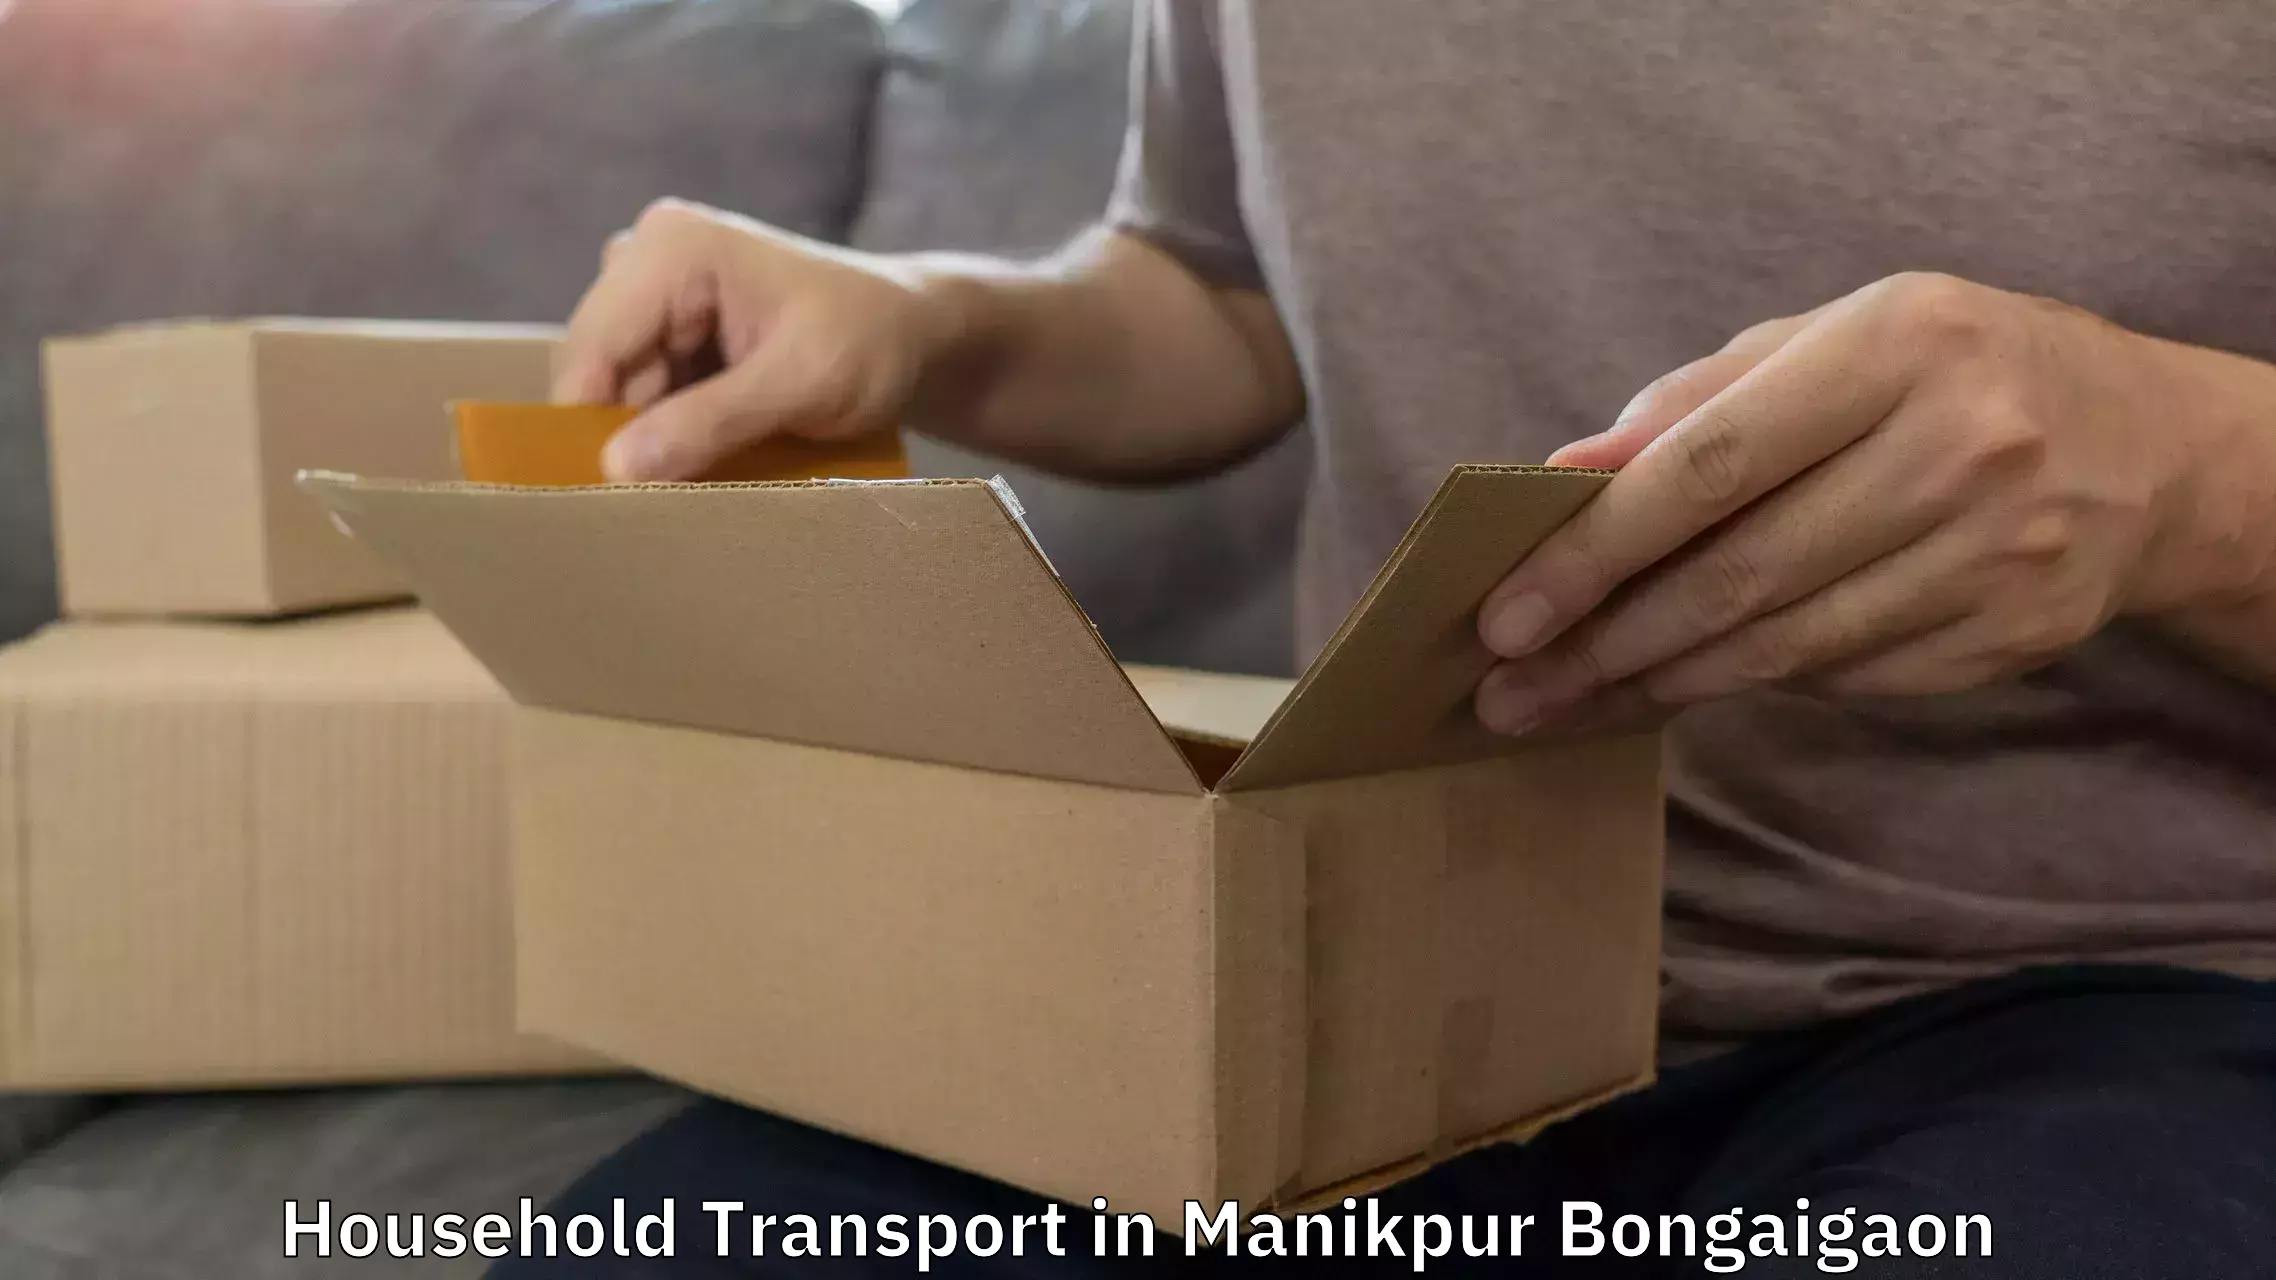 Quality household transport in Manikpur Bongaigaon